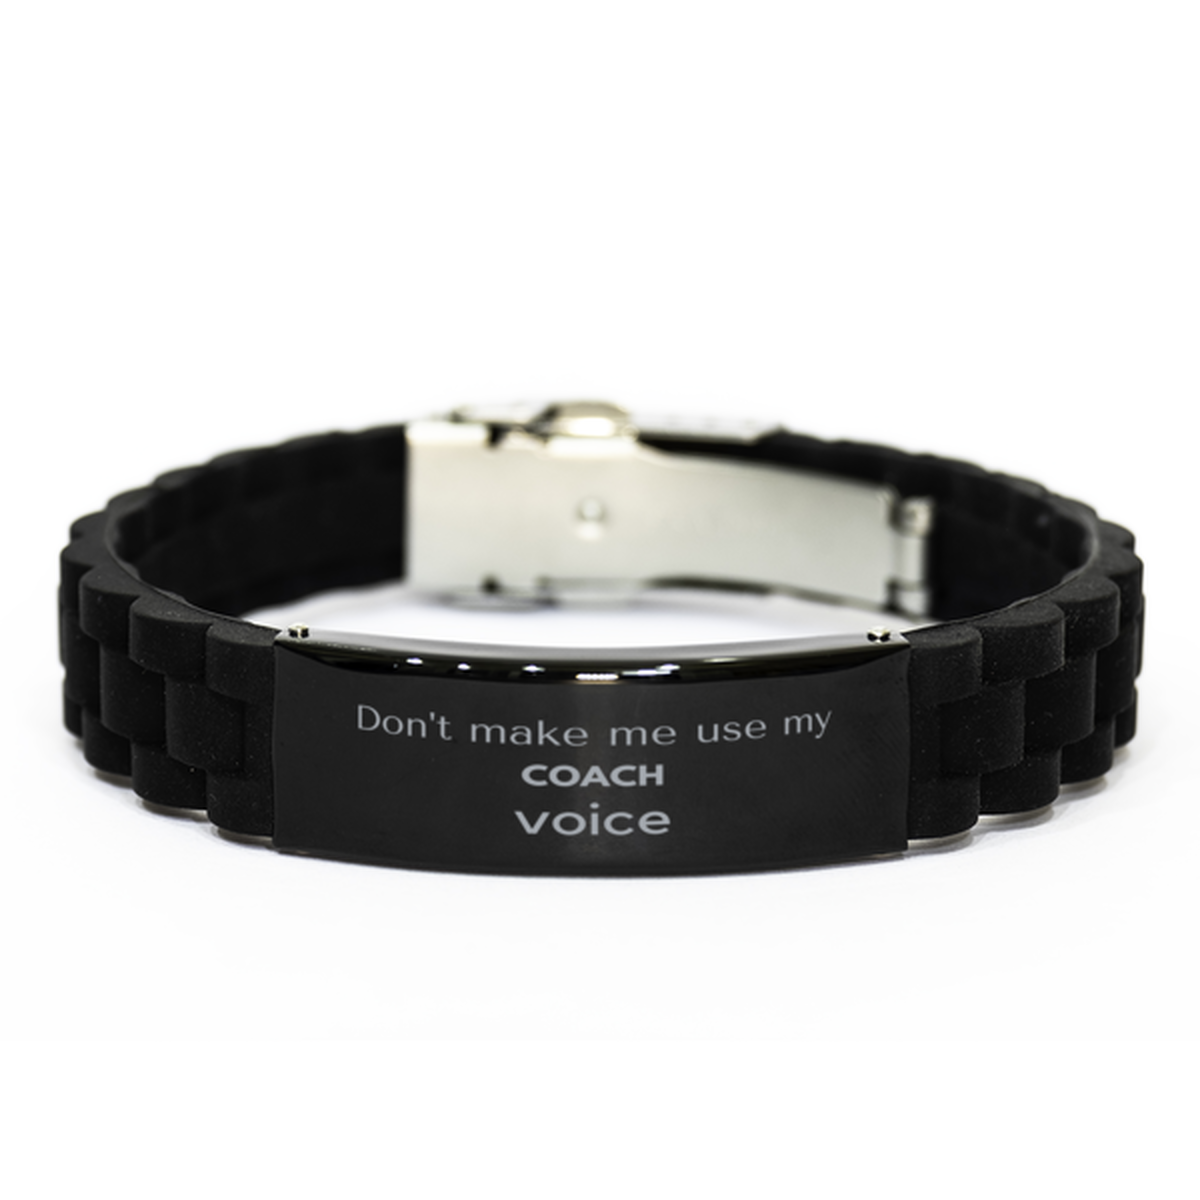 Don't make me use my Coach voice, Sarcasm Coach Gifts, Christmas Coach Black Glidelock Clasp Bracelet Birthday Unique Gifts For Coach Coworkers, Men, Women, Colleague, Friends